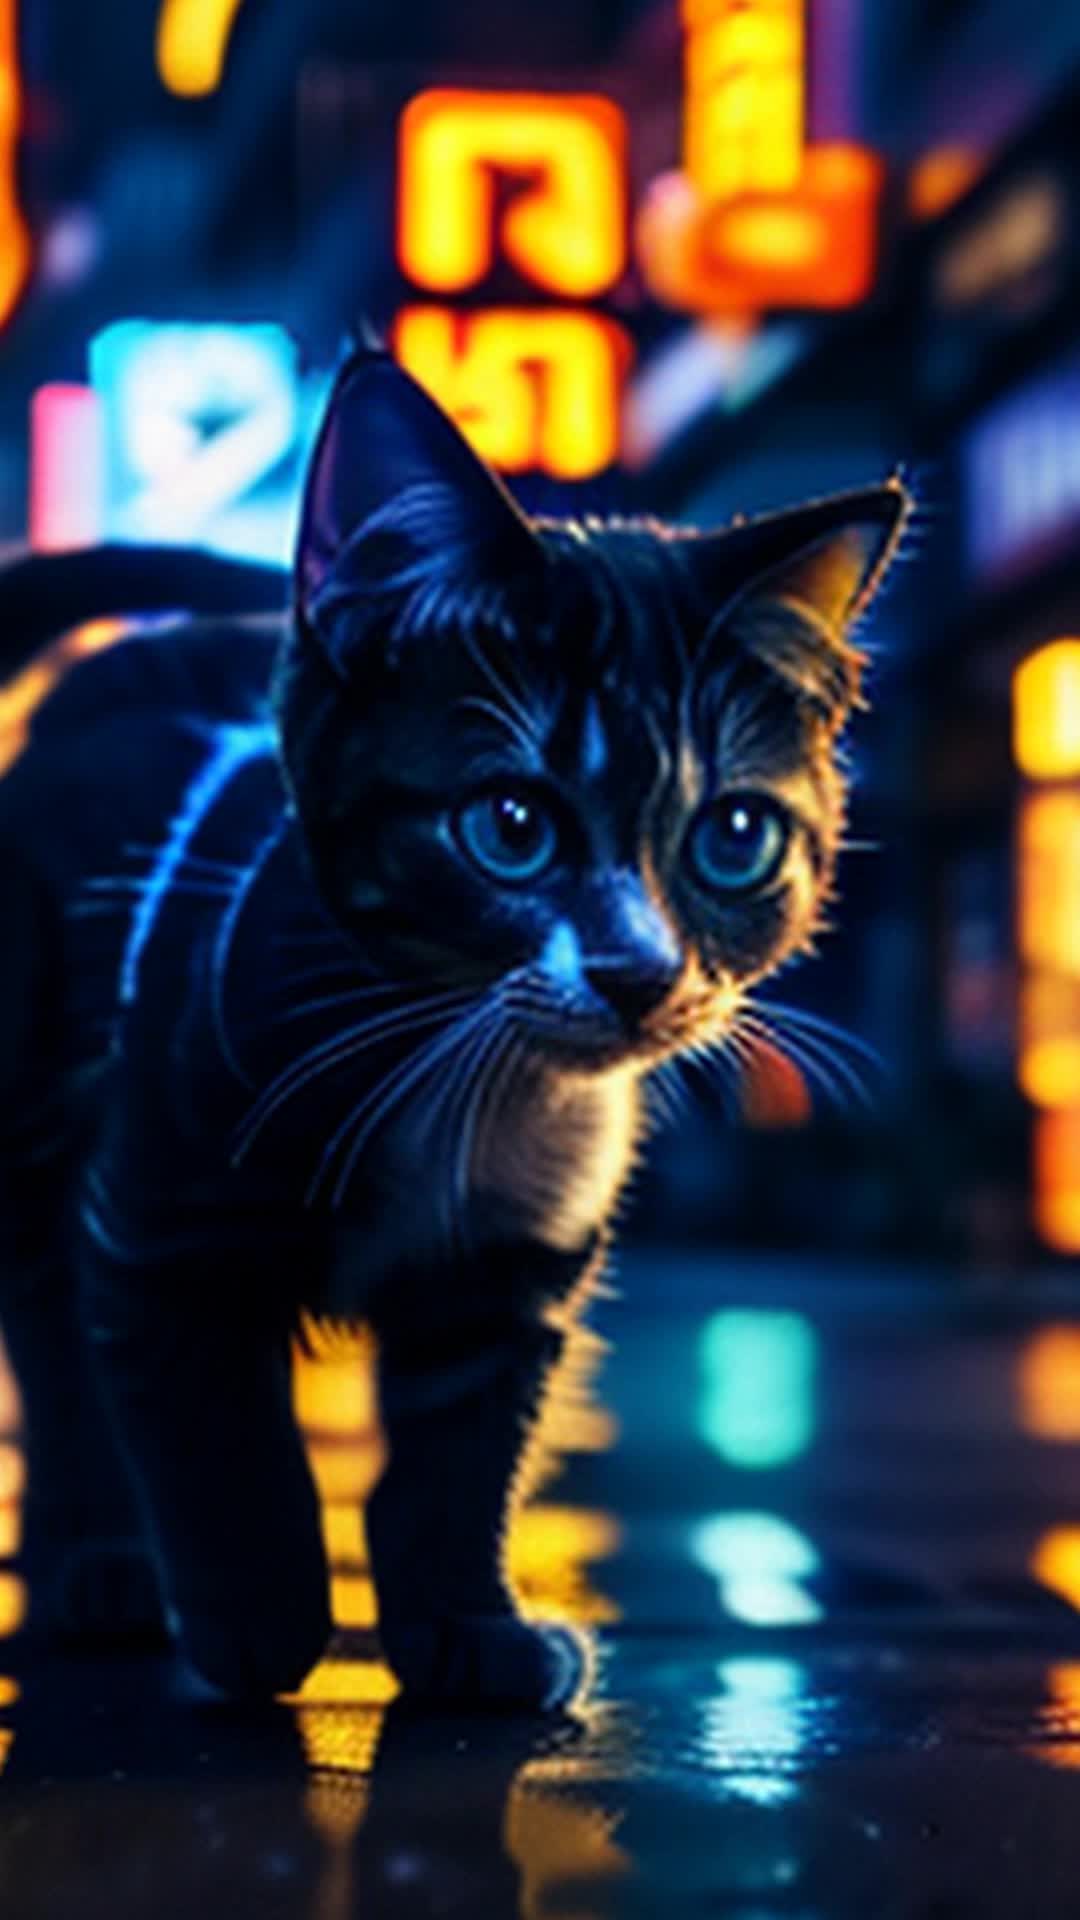 Kitten scampering up neon-lit sign, following wise old alley cat, vibrant neon lights, cityscape at night, intricate details, sharp focus, soft shadows, wide-angle shot